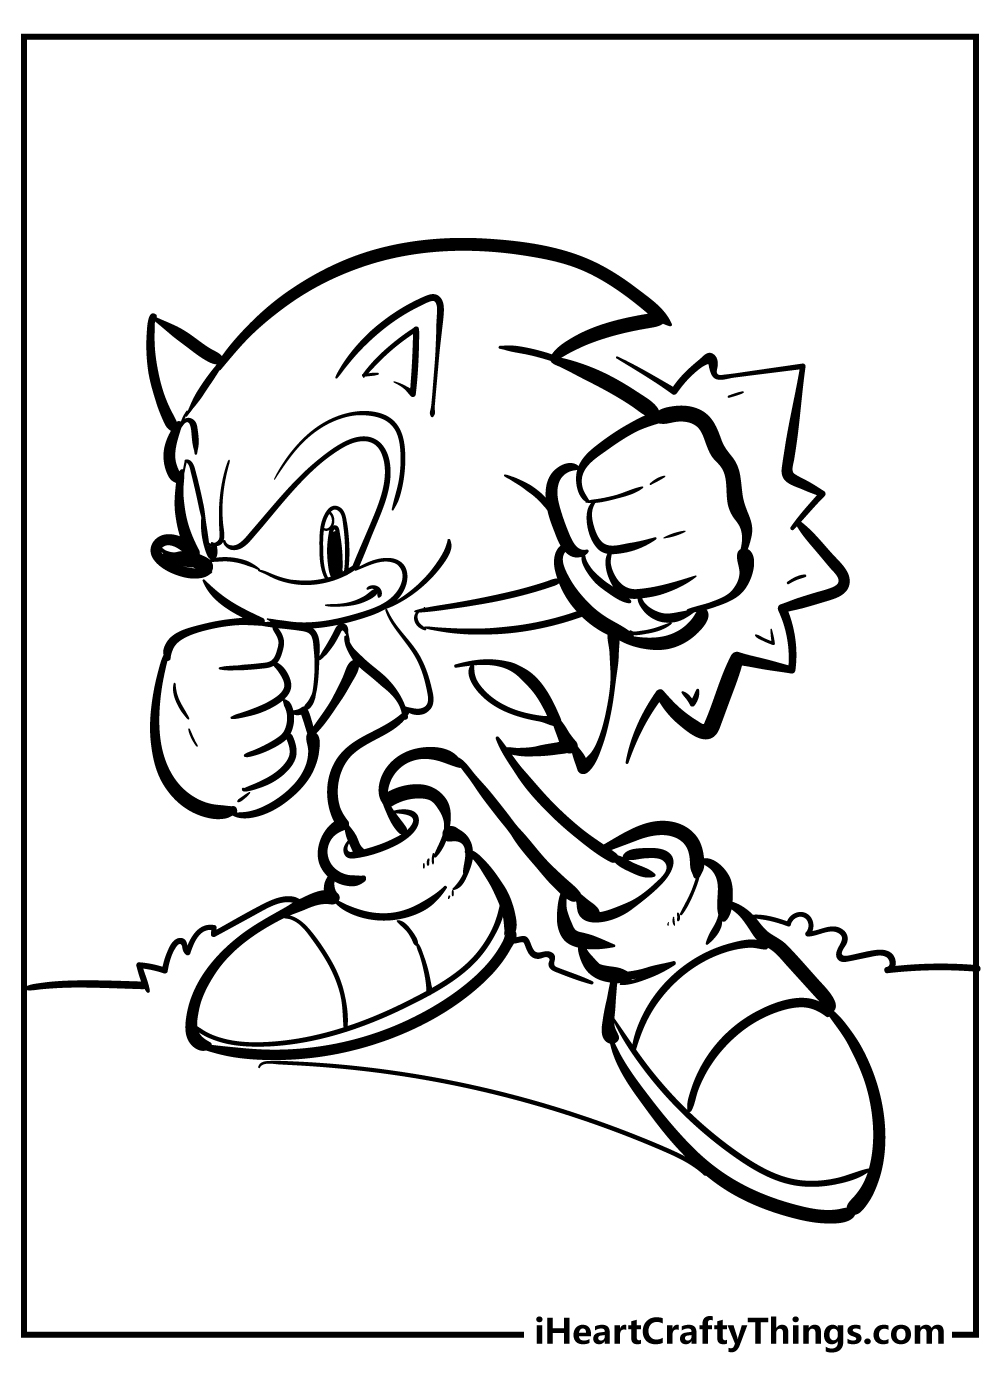 Sonic coloring pages free printables